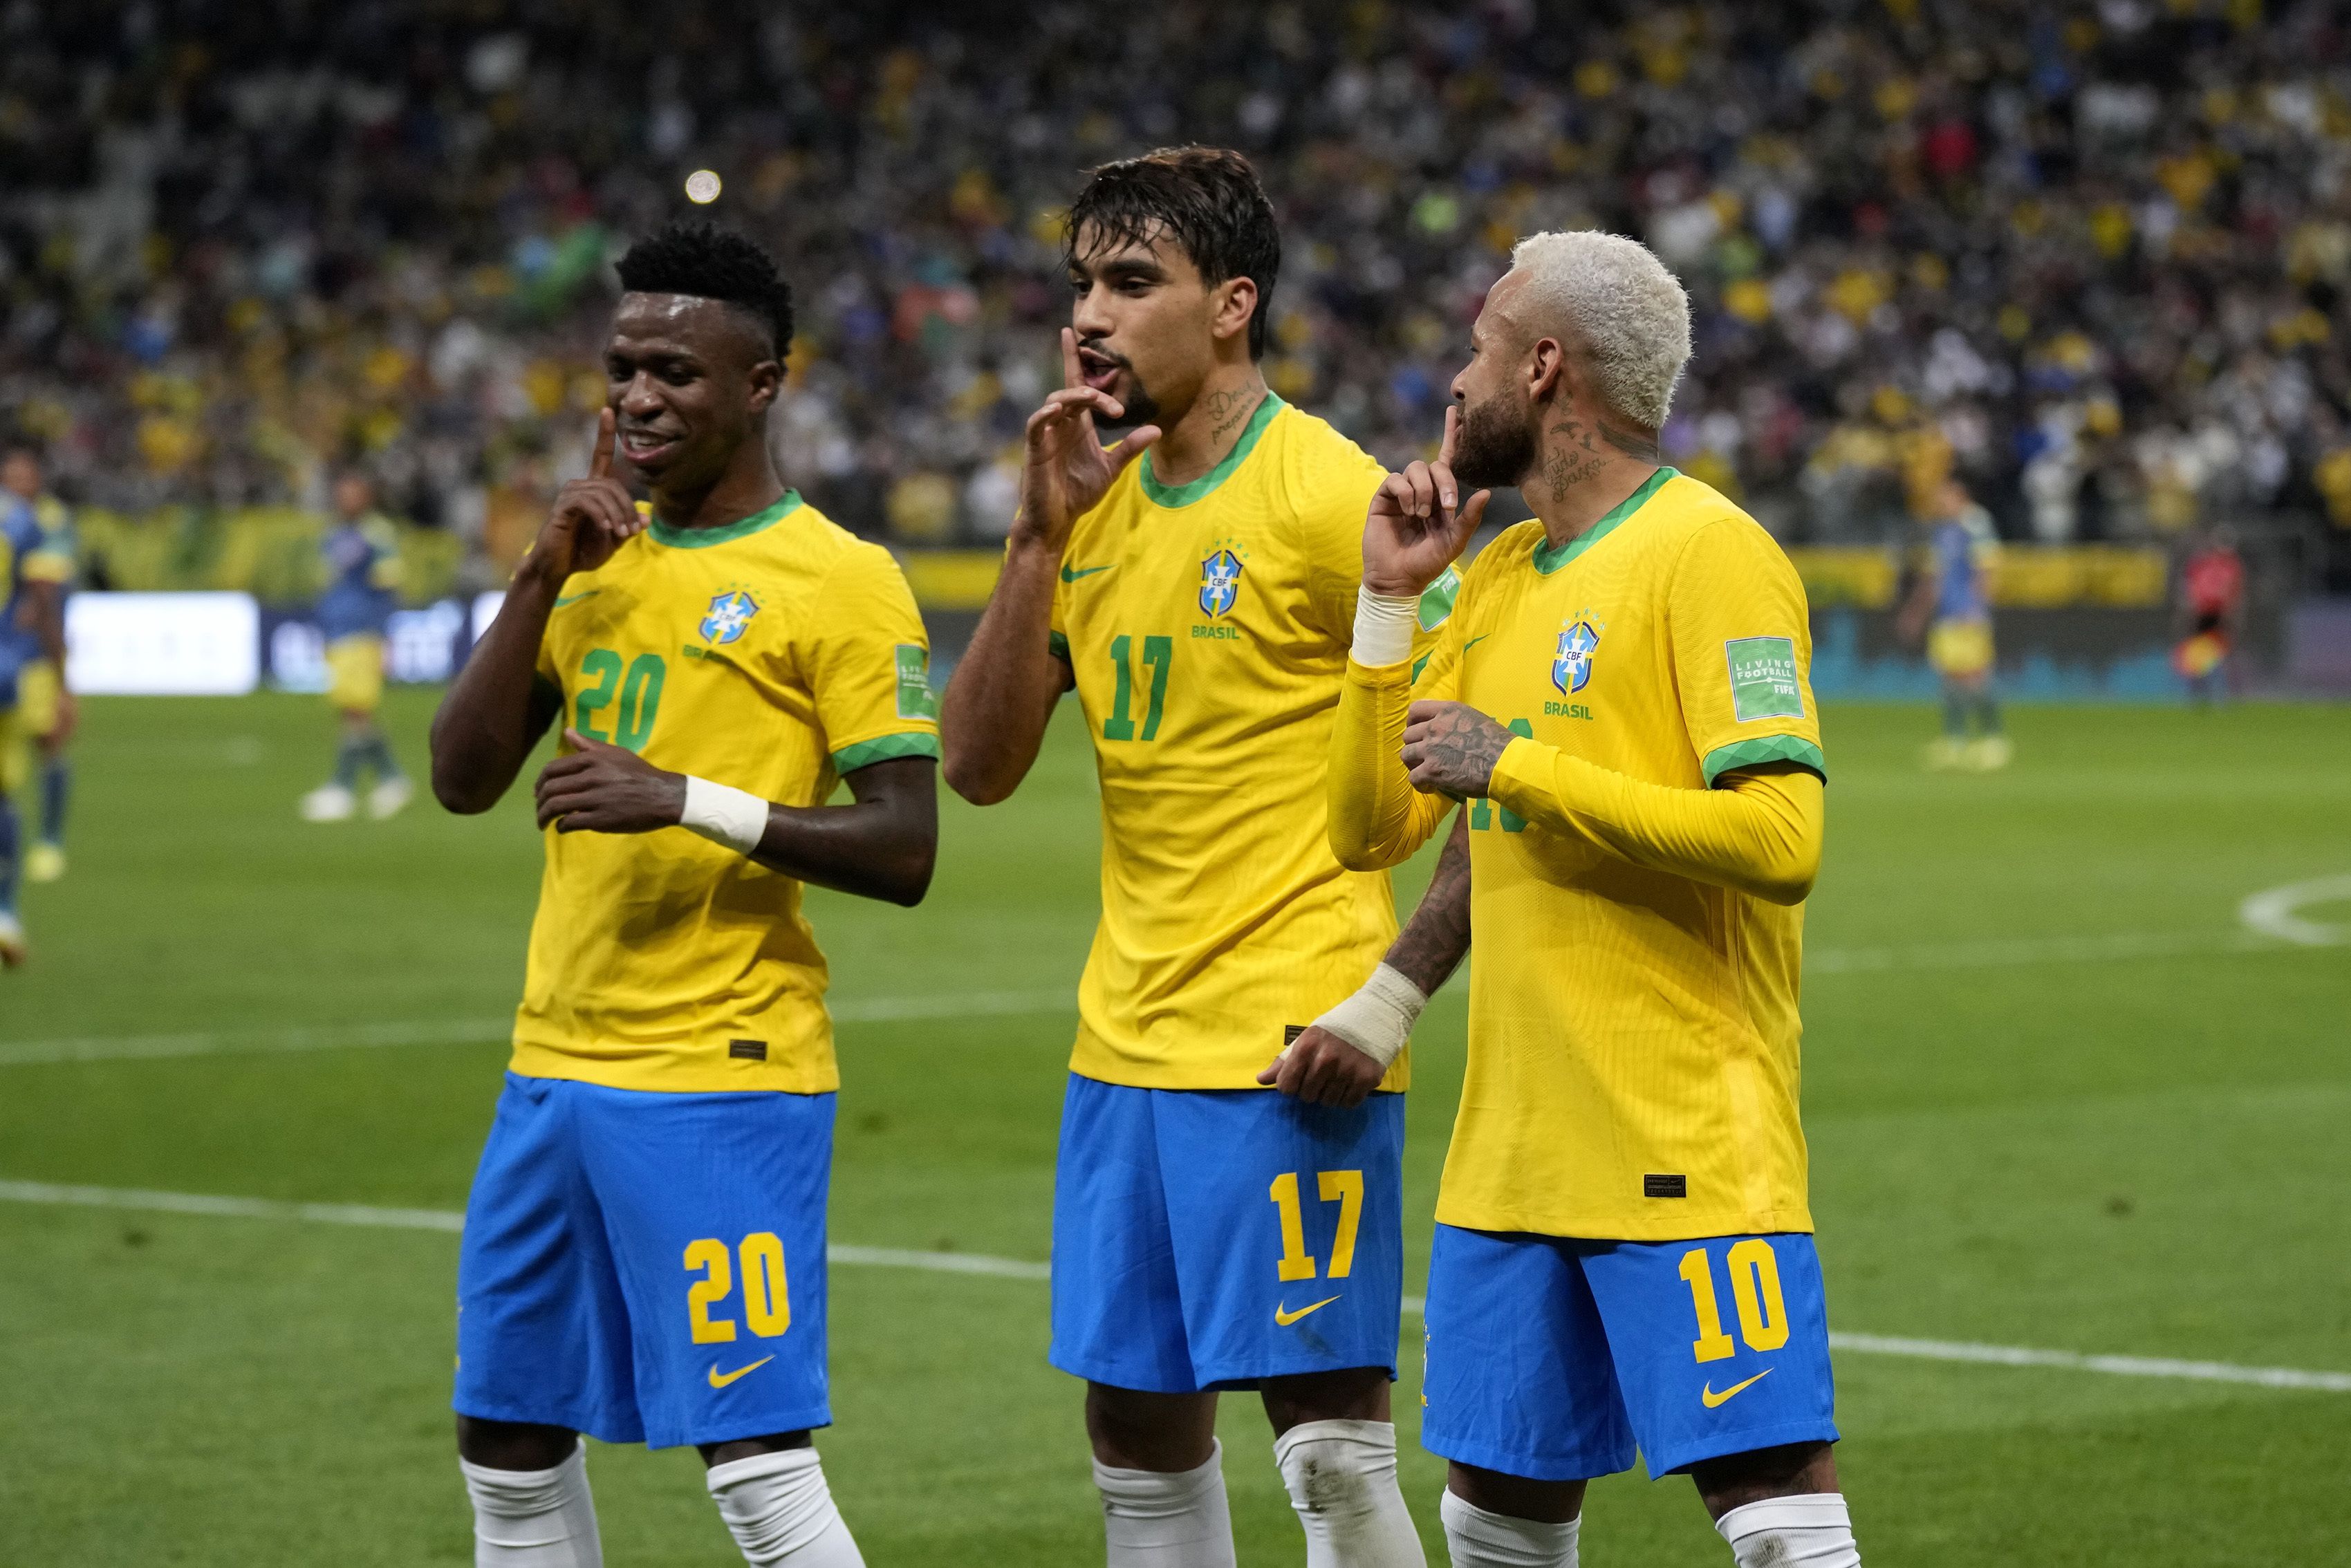 World Cup 2022: Brazil team guide | Table, fixtures, live scores, results, squad and insights in Qatar | Football News | Sky Sports